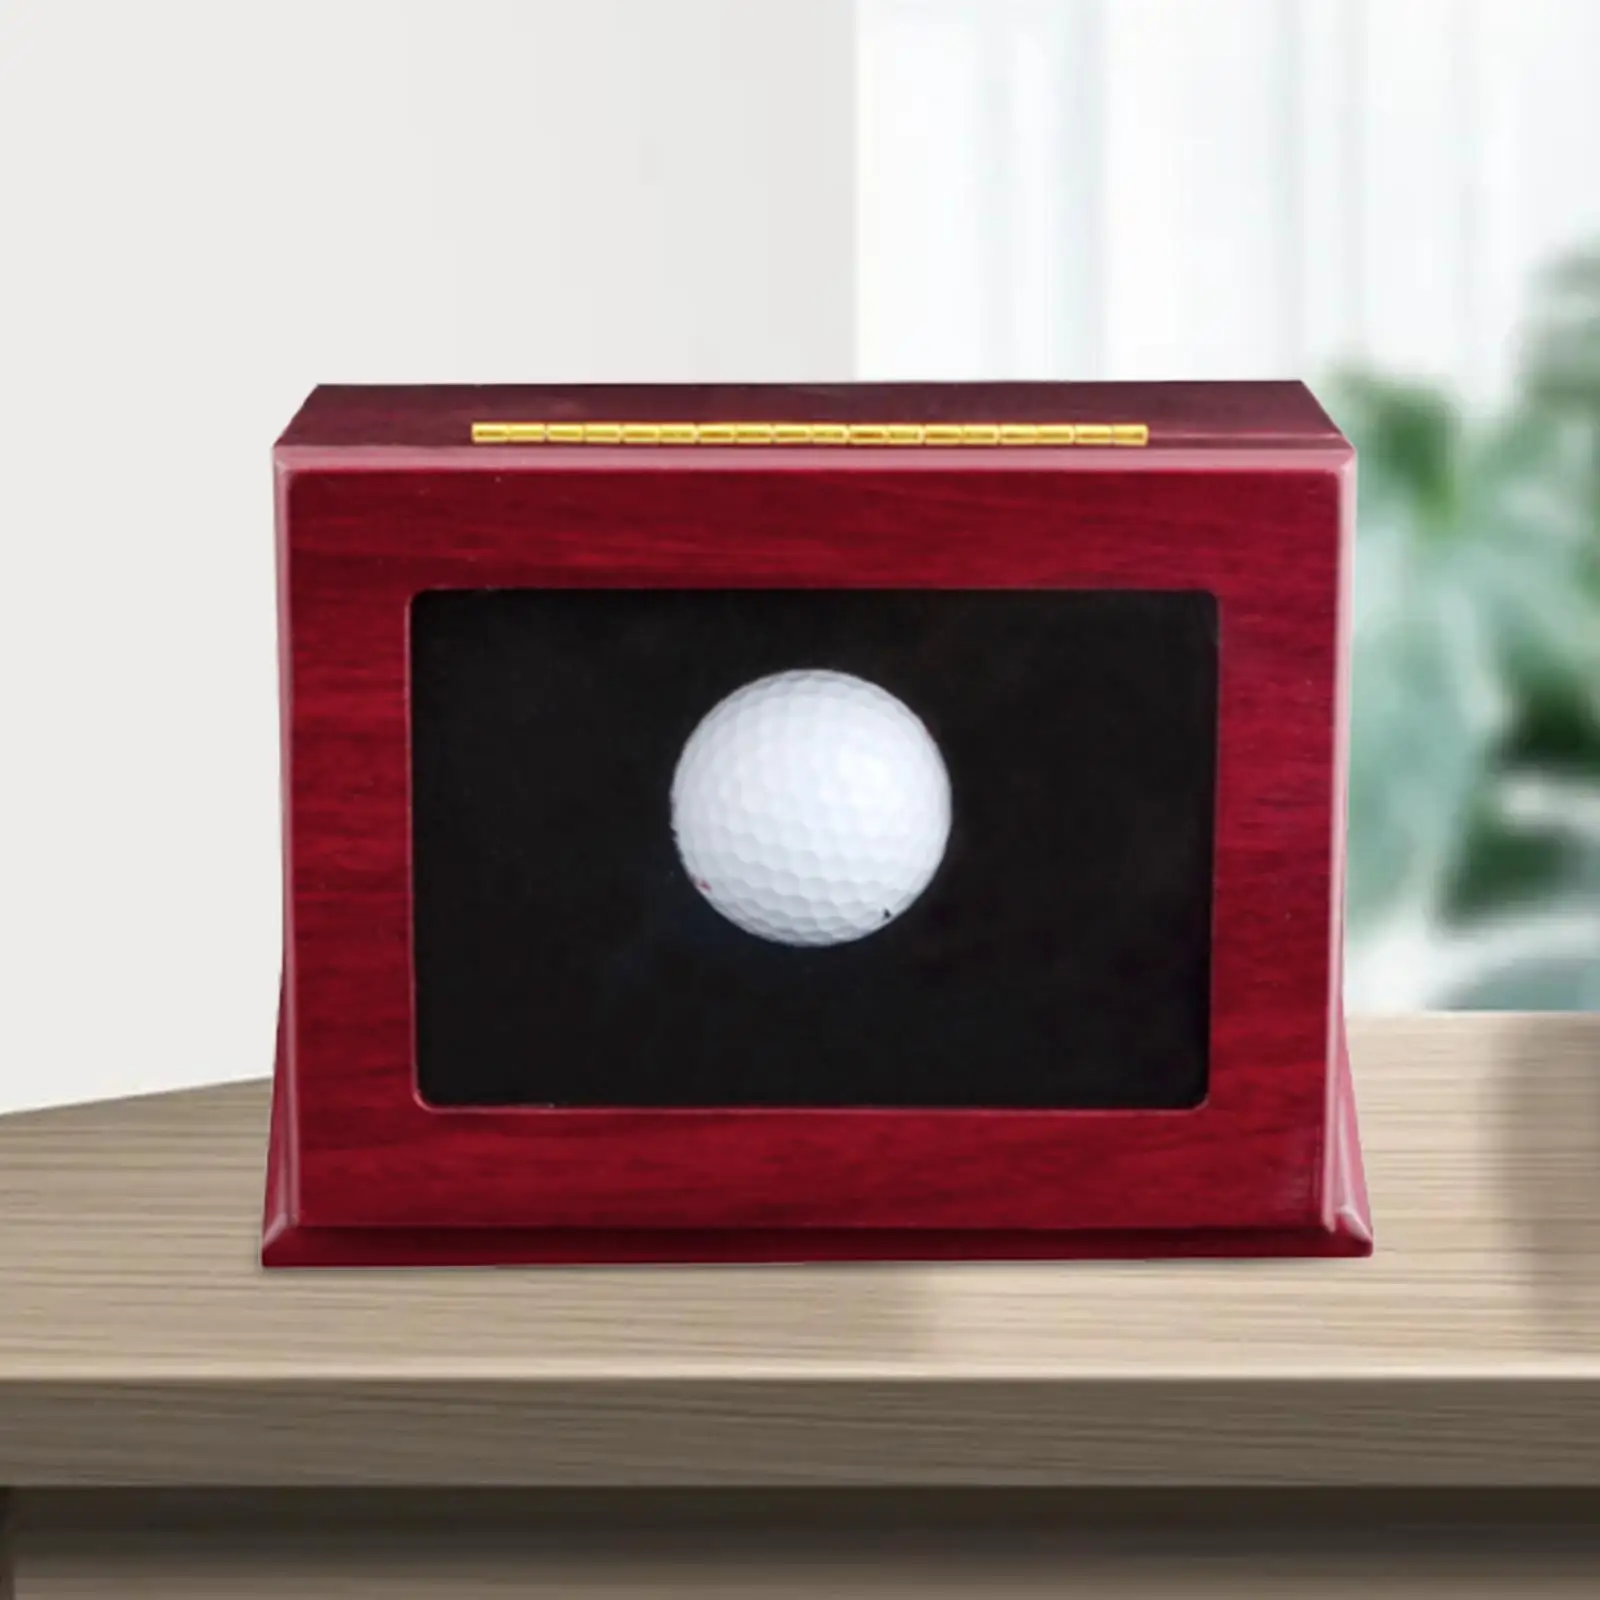 Golf Ball Display Case Gift for Golfers Showcase Decorative Box Dustproof Wood with Clear Window Protection Golf Ball Holder